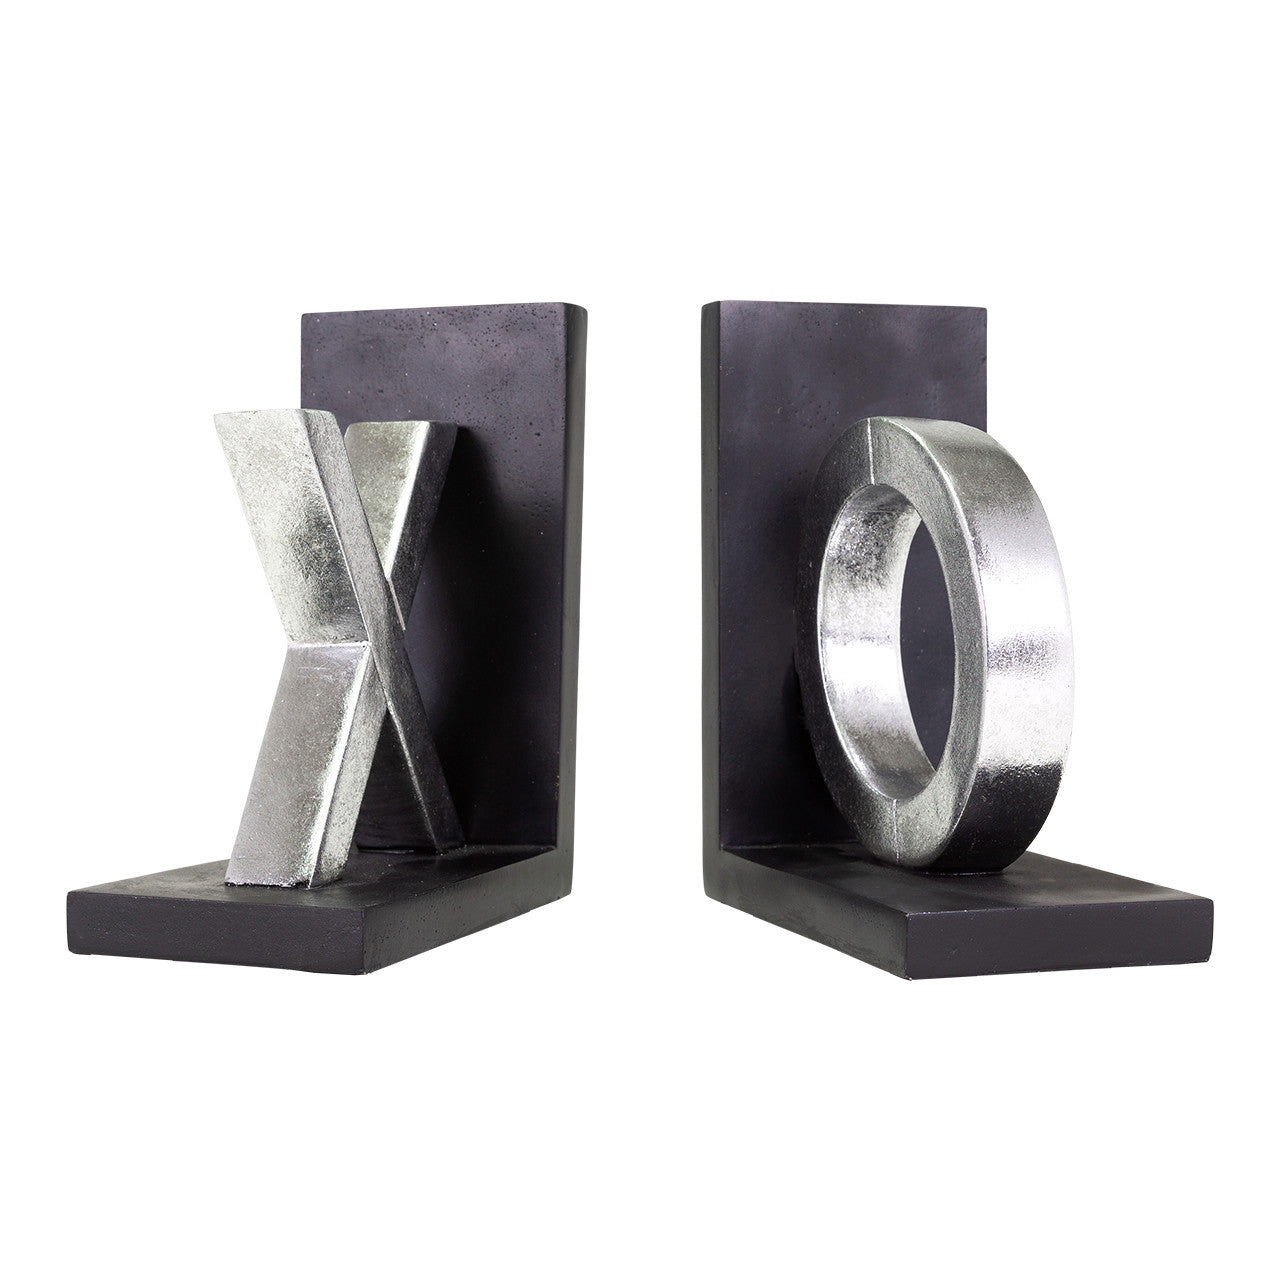 Set of X and O Bookends